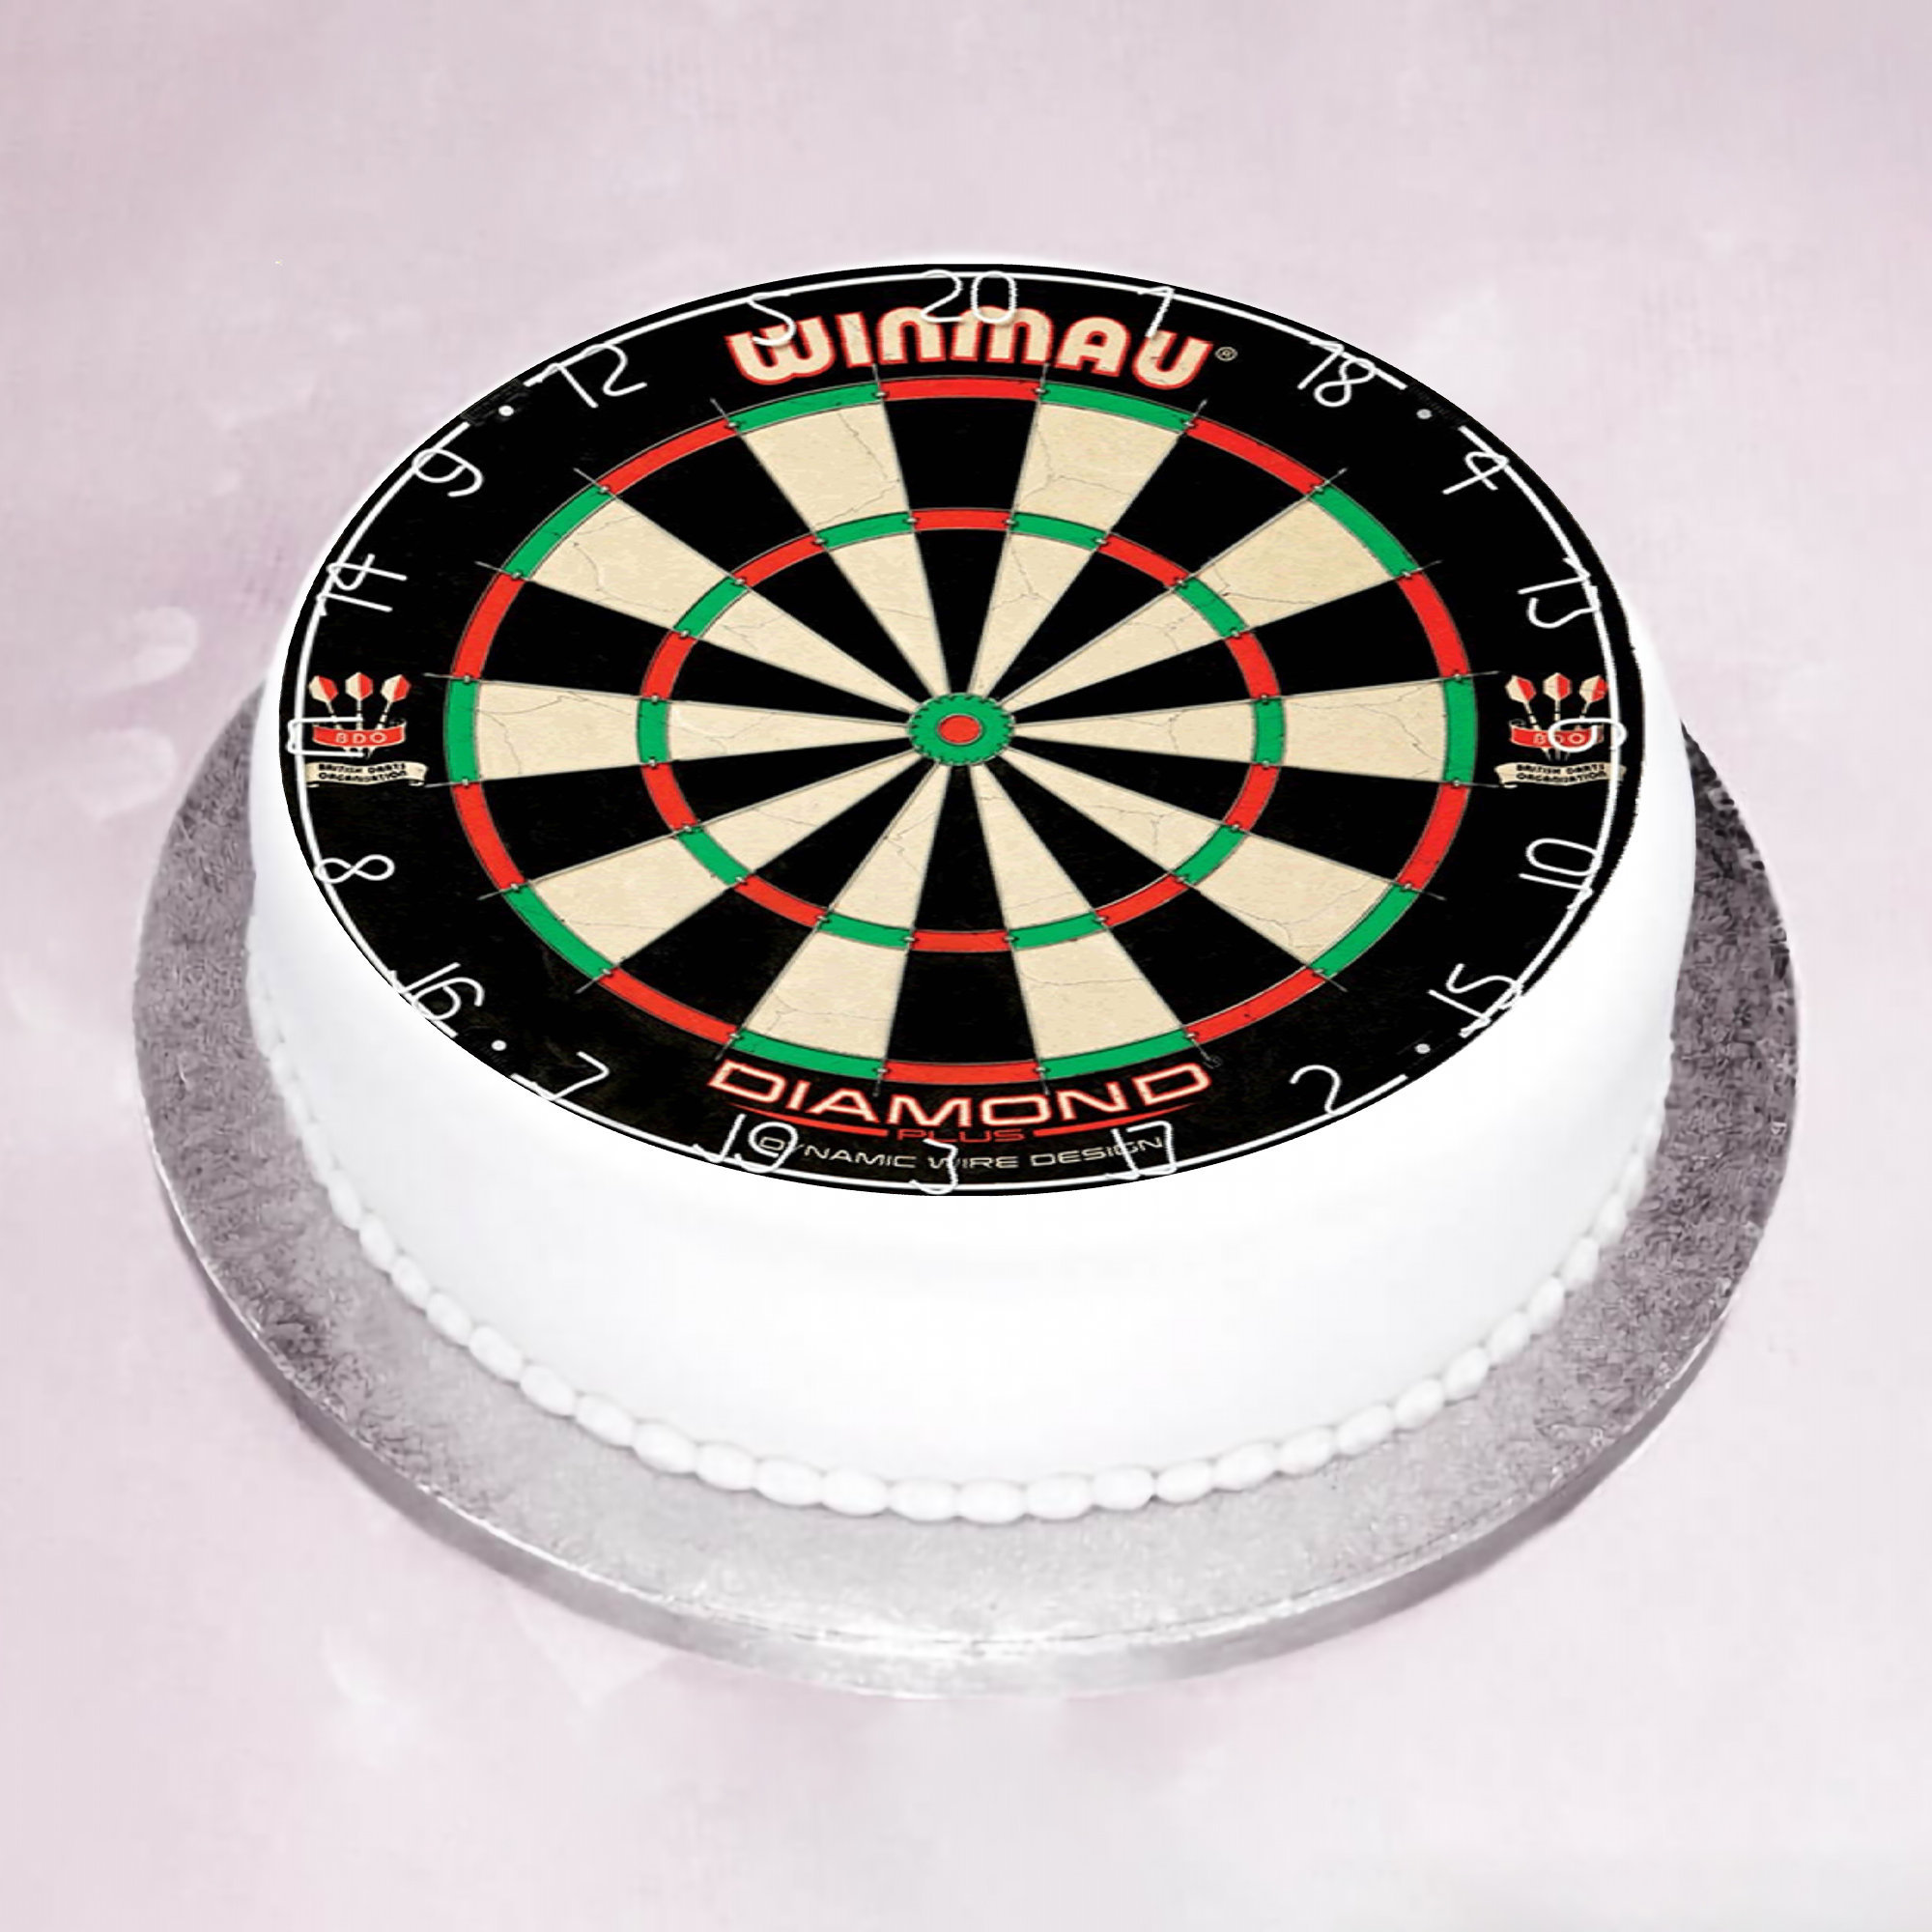 DARTBOARD EDIBLE WAFER & ICING PERSONALISED CAKE TOPPER DECORATION BIRTHDAY 